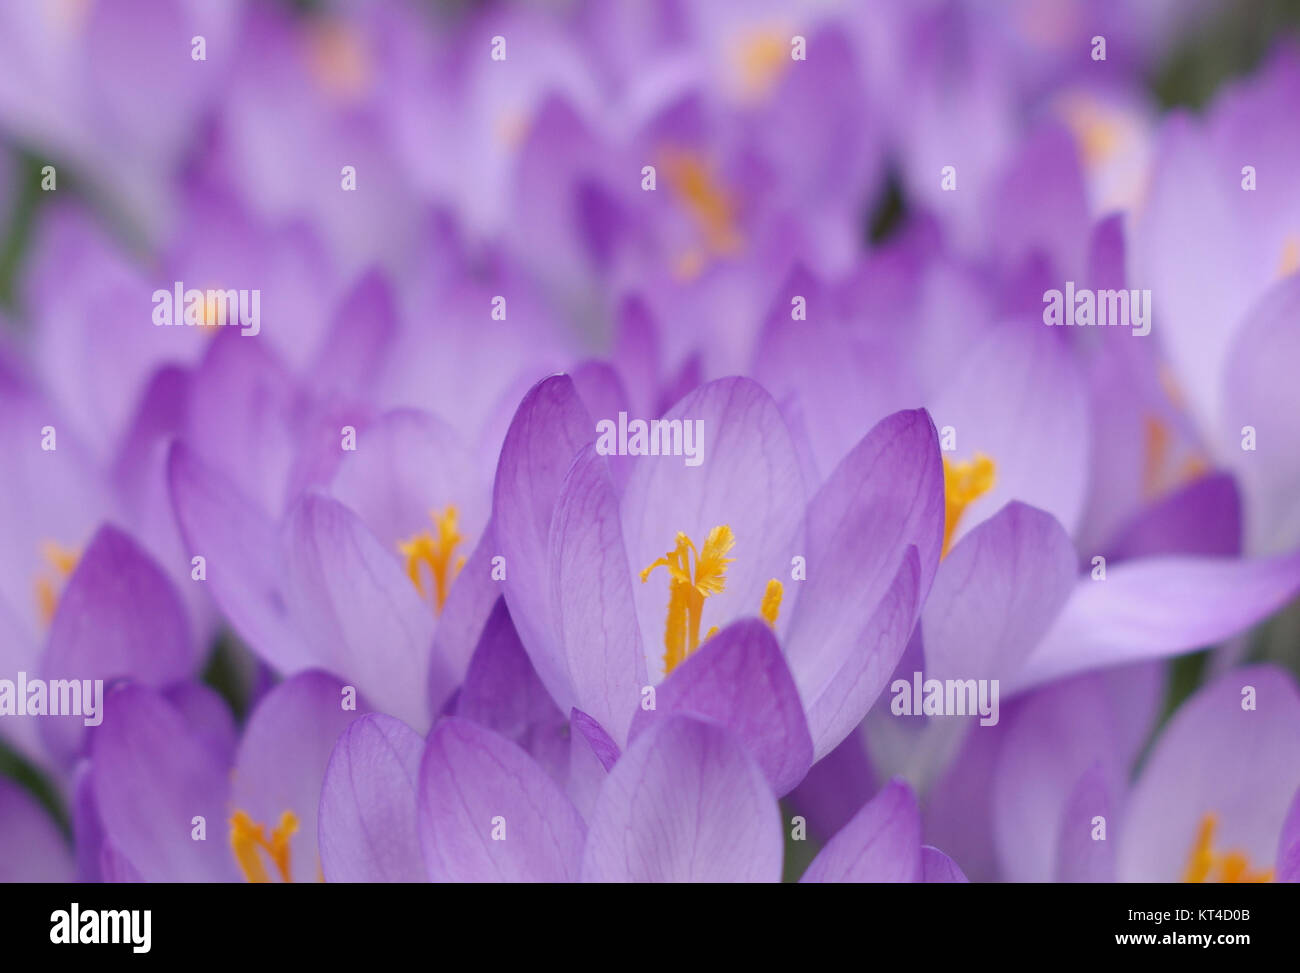 Violet blossoms of crocuses Stock Photo